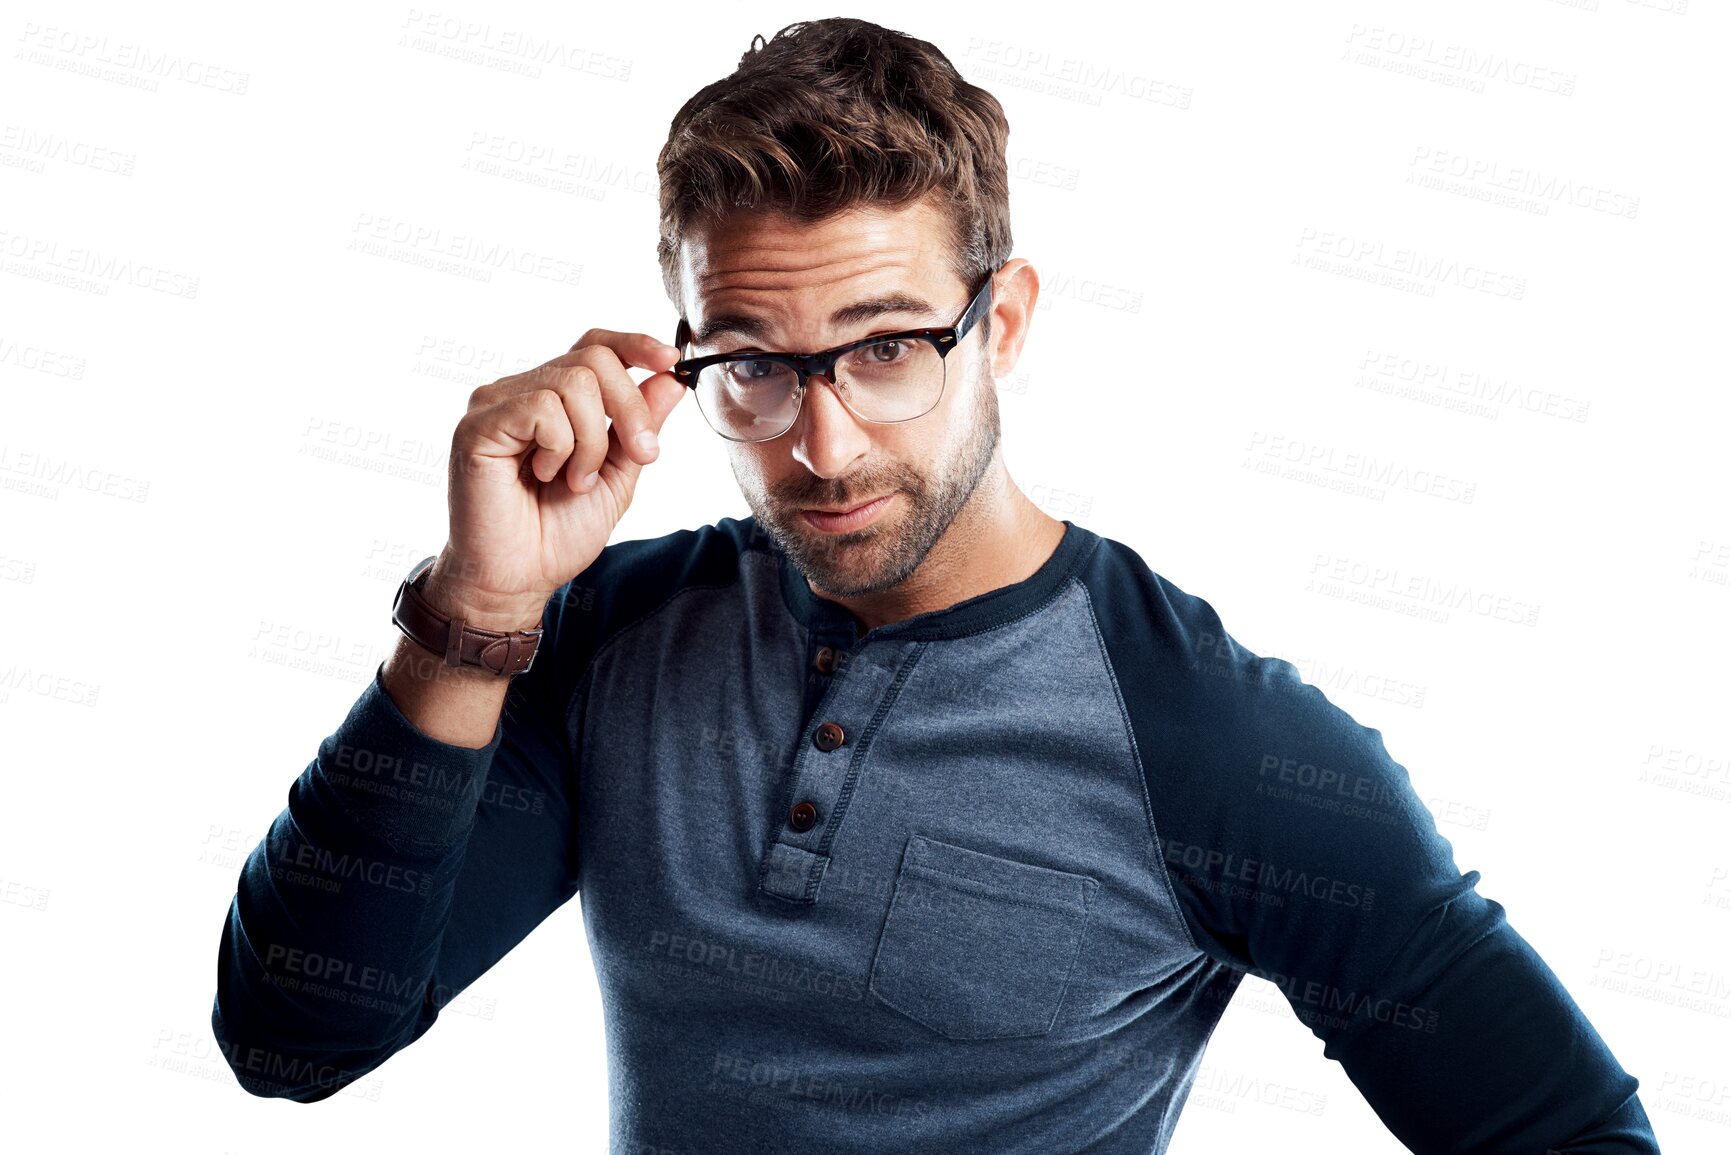 Buy stock photo Portrait, handsome and glasses, man isolated on transparent png background with casual fashion. Relax, pose and serious male model with looking with confidence, vision and spectacles for eyesight.